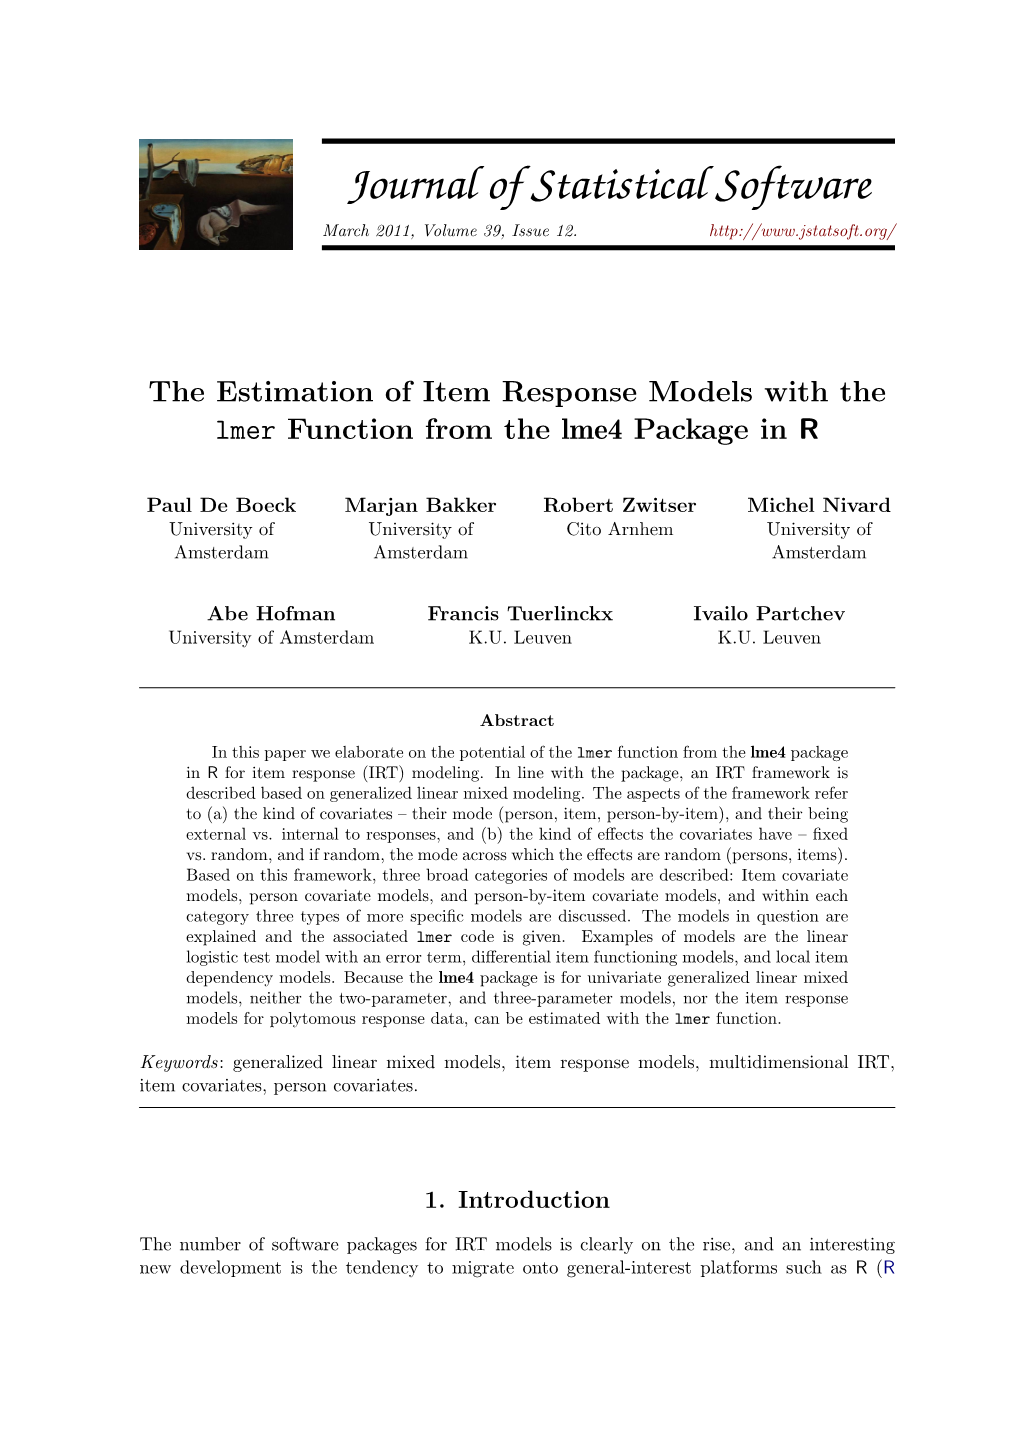 The Estimation of Item Response Models with the Lmer Function from the Lme4 Package in R